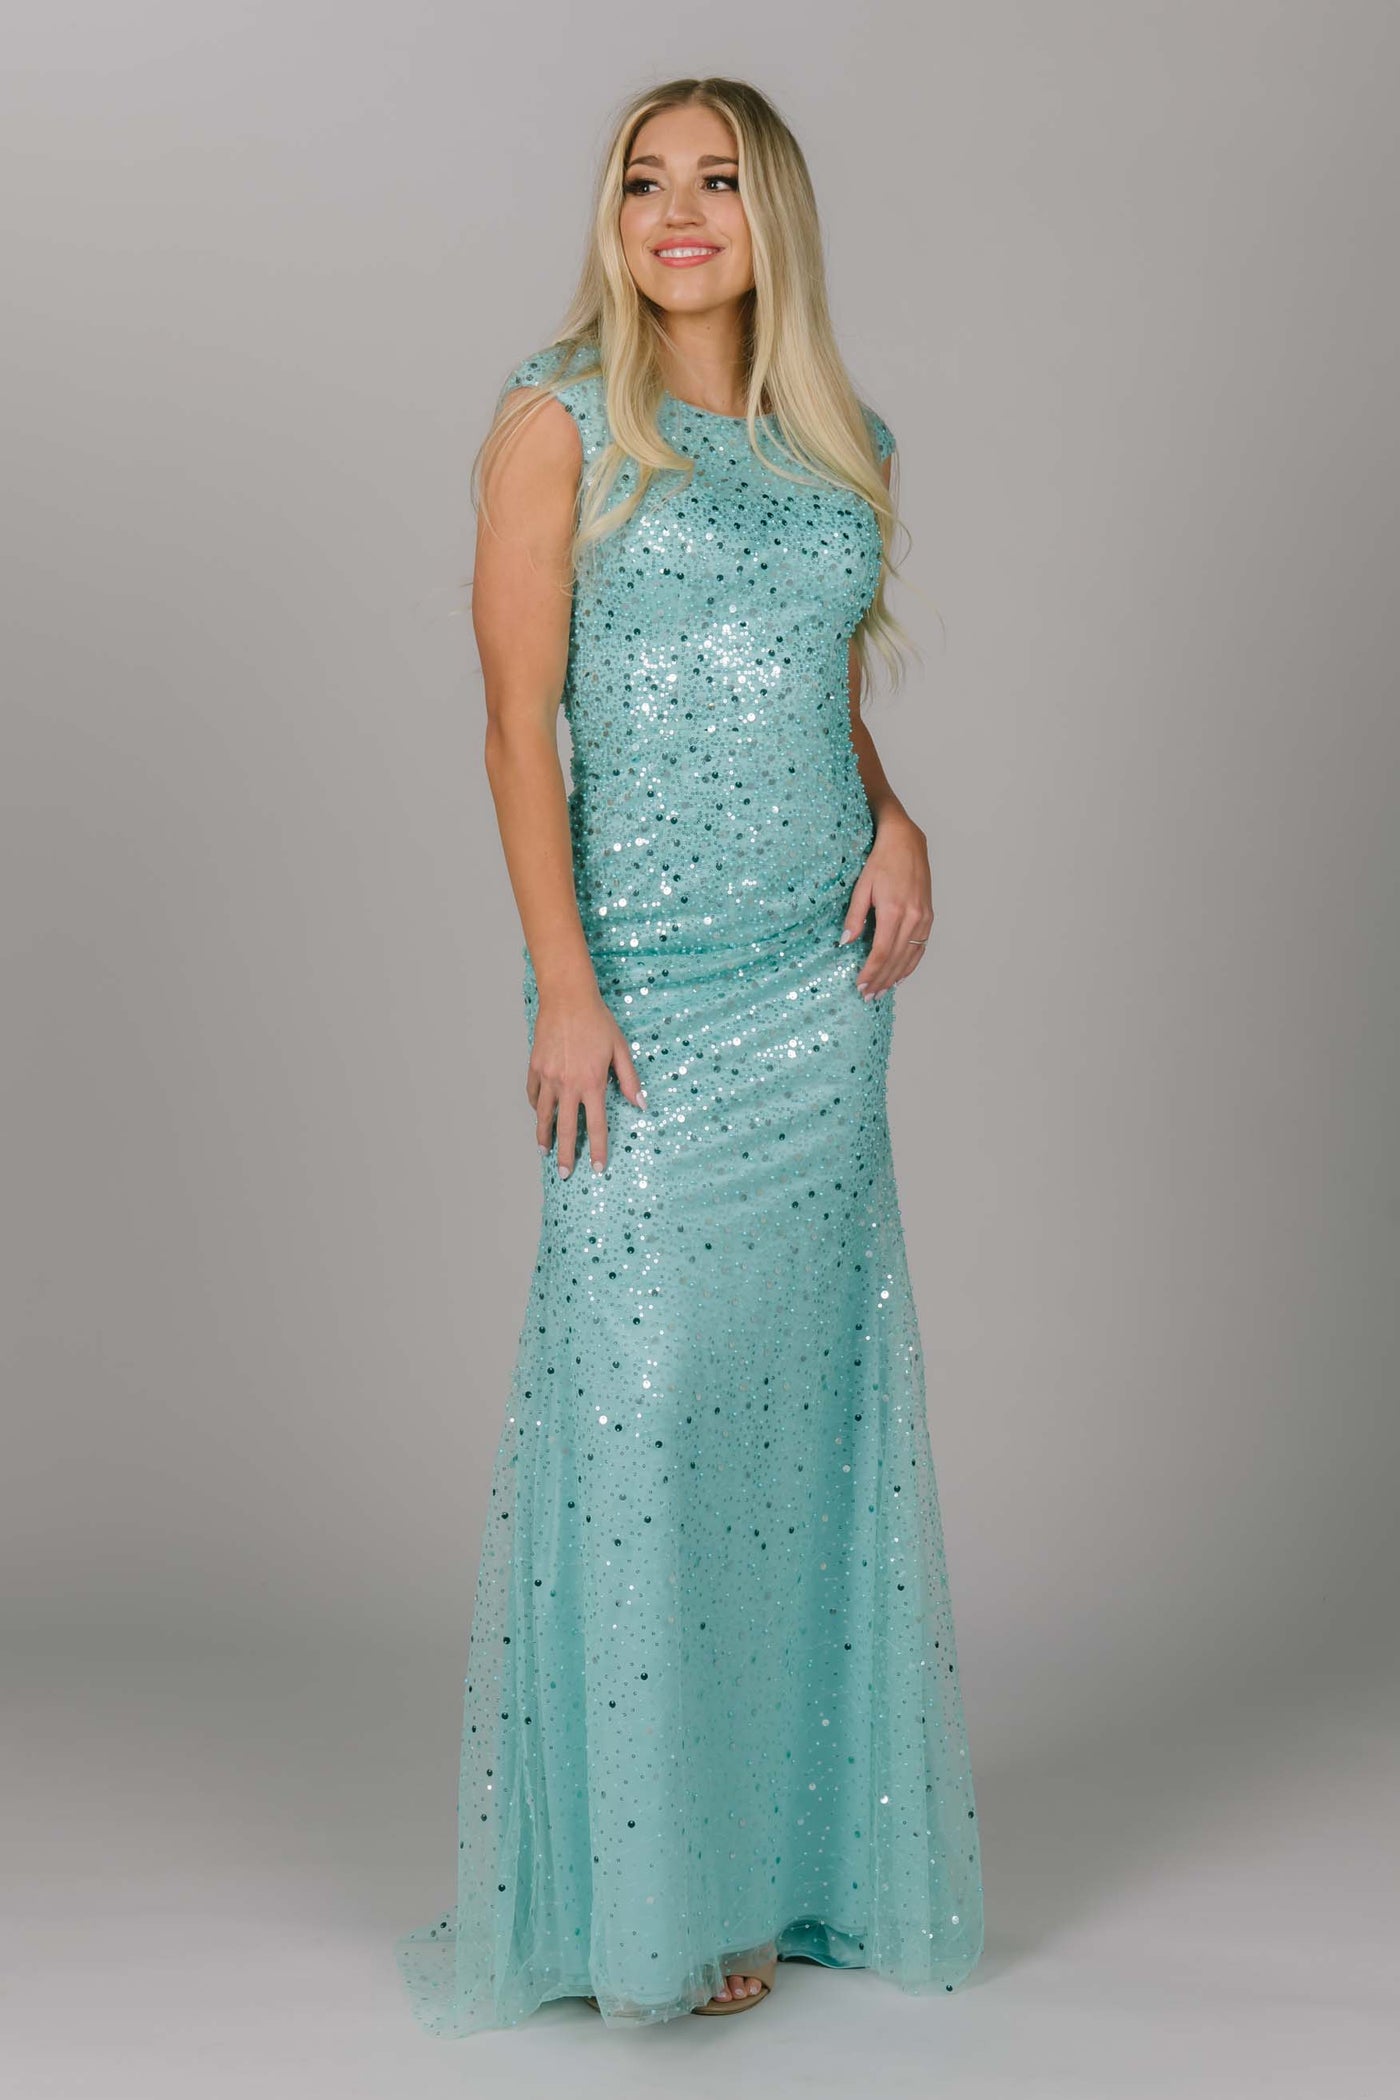 Blue sparkly modest prom dress. This dress has cap sleeves and is a fitted modest dress. This light blue dress is our new favorite modest prom dress. 